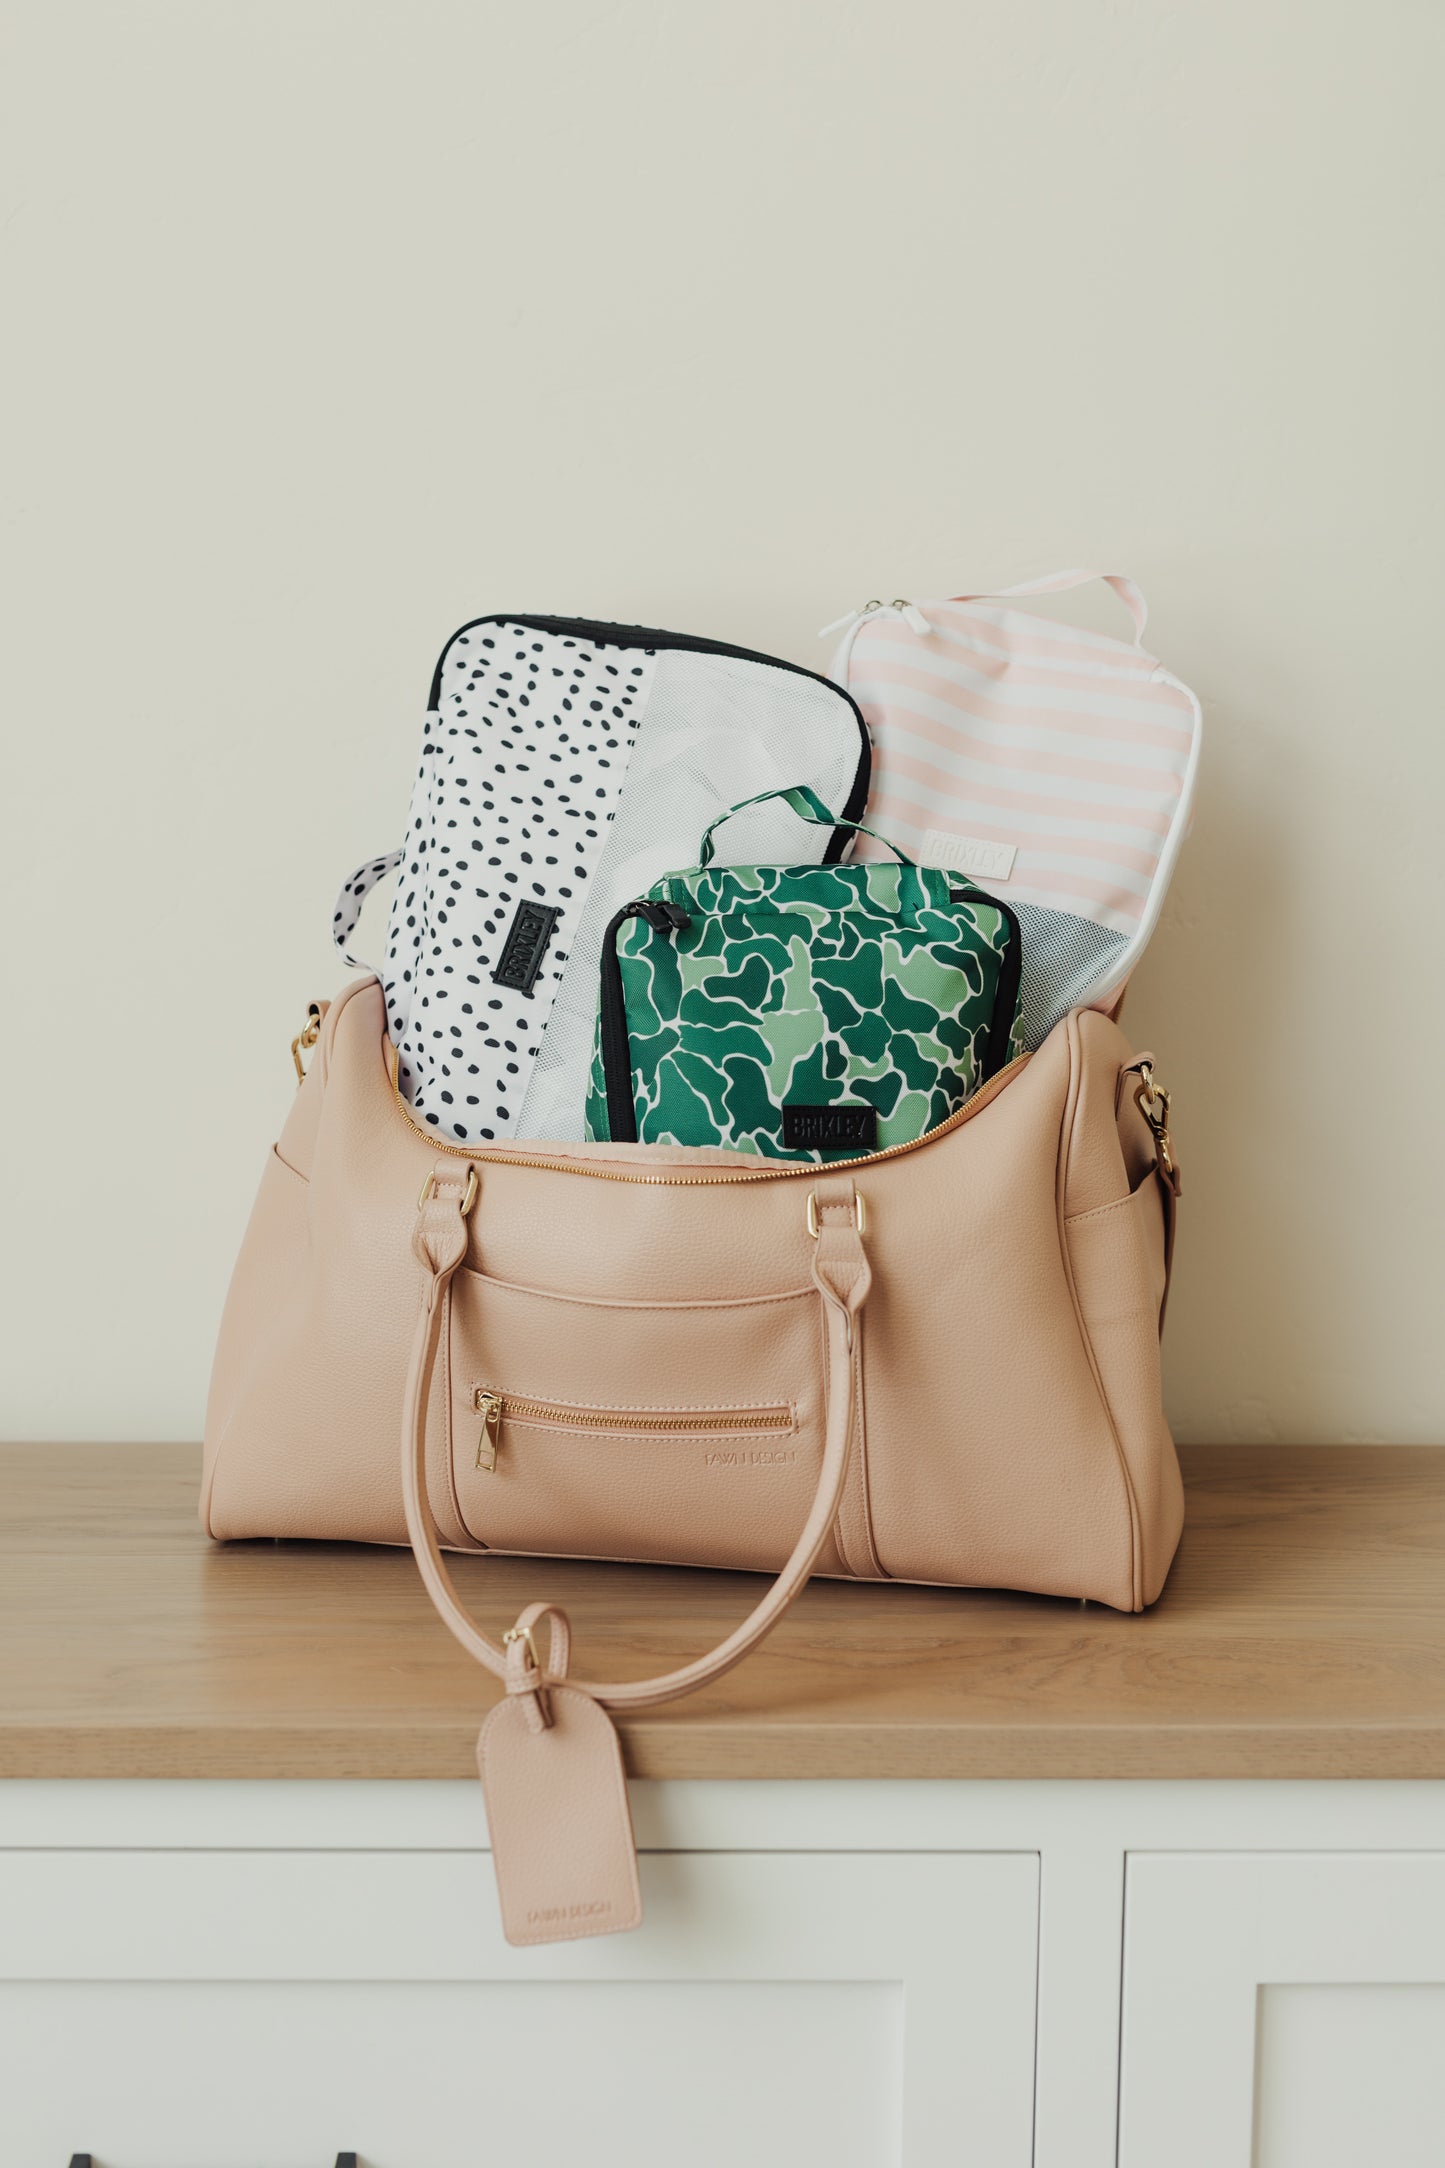 Three (3) Brixley Bag Packing cubes packed into a tan bag. One (1) Dalmatian print, one (1) Camouflage (Scout) print, one (1) white and pink striped (Valentine). All sitting on top of a wood countertop 